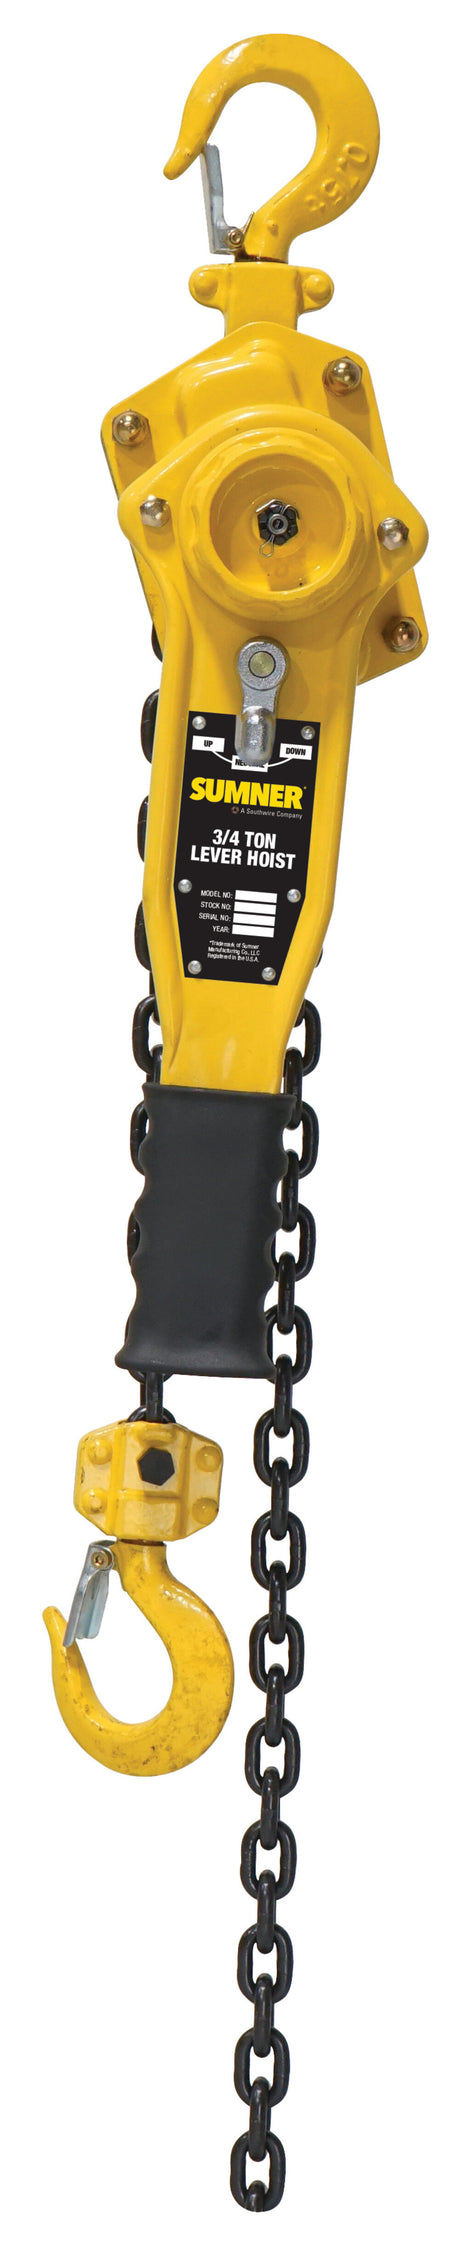 3/4 Ton Lever Hoist with 15 ft. Chain Fall 787544